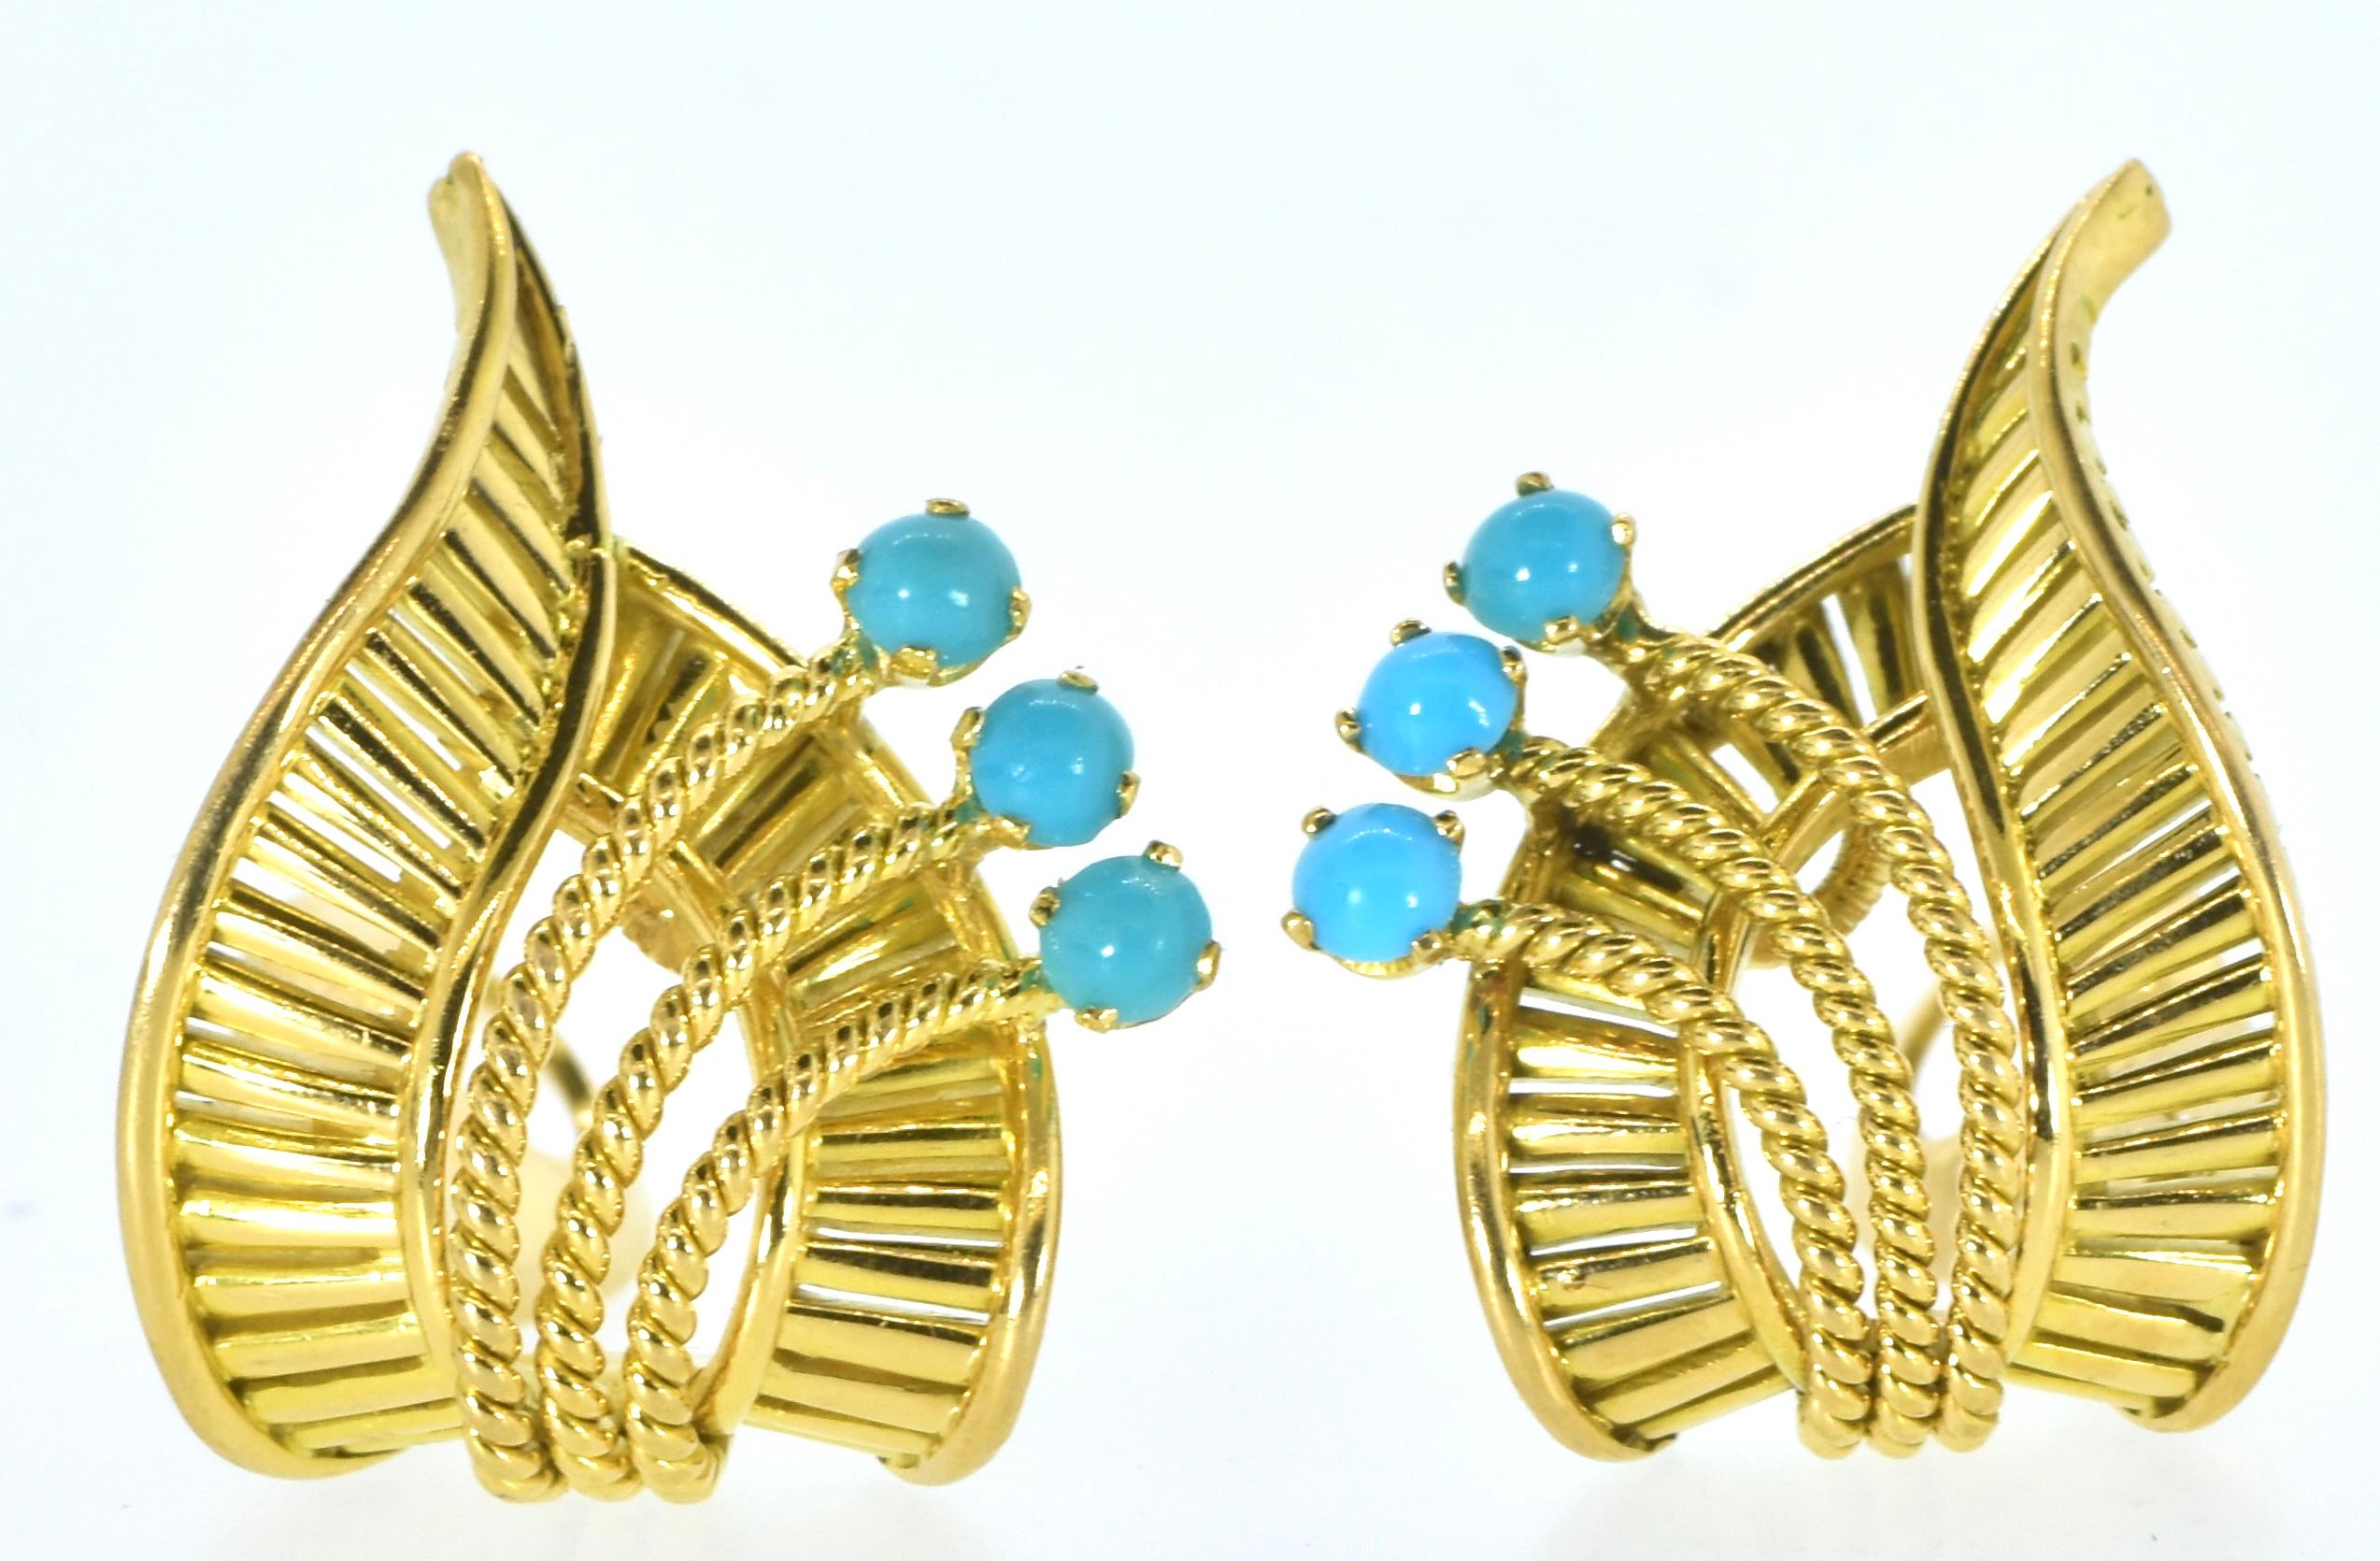 Cabochon 18K Yellow Gold Earrings with Fine Turquoise in a Leaf Motif, Vintage , c. 1950. For Sale